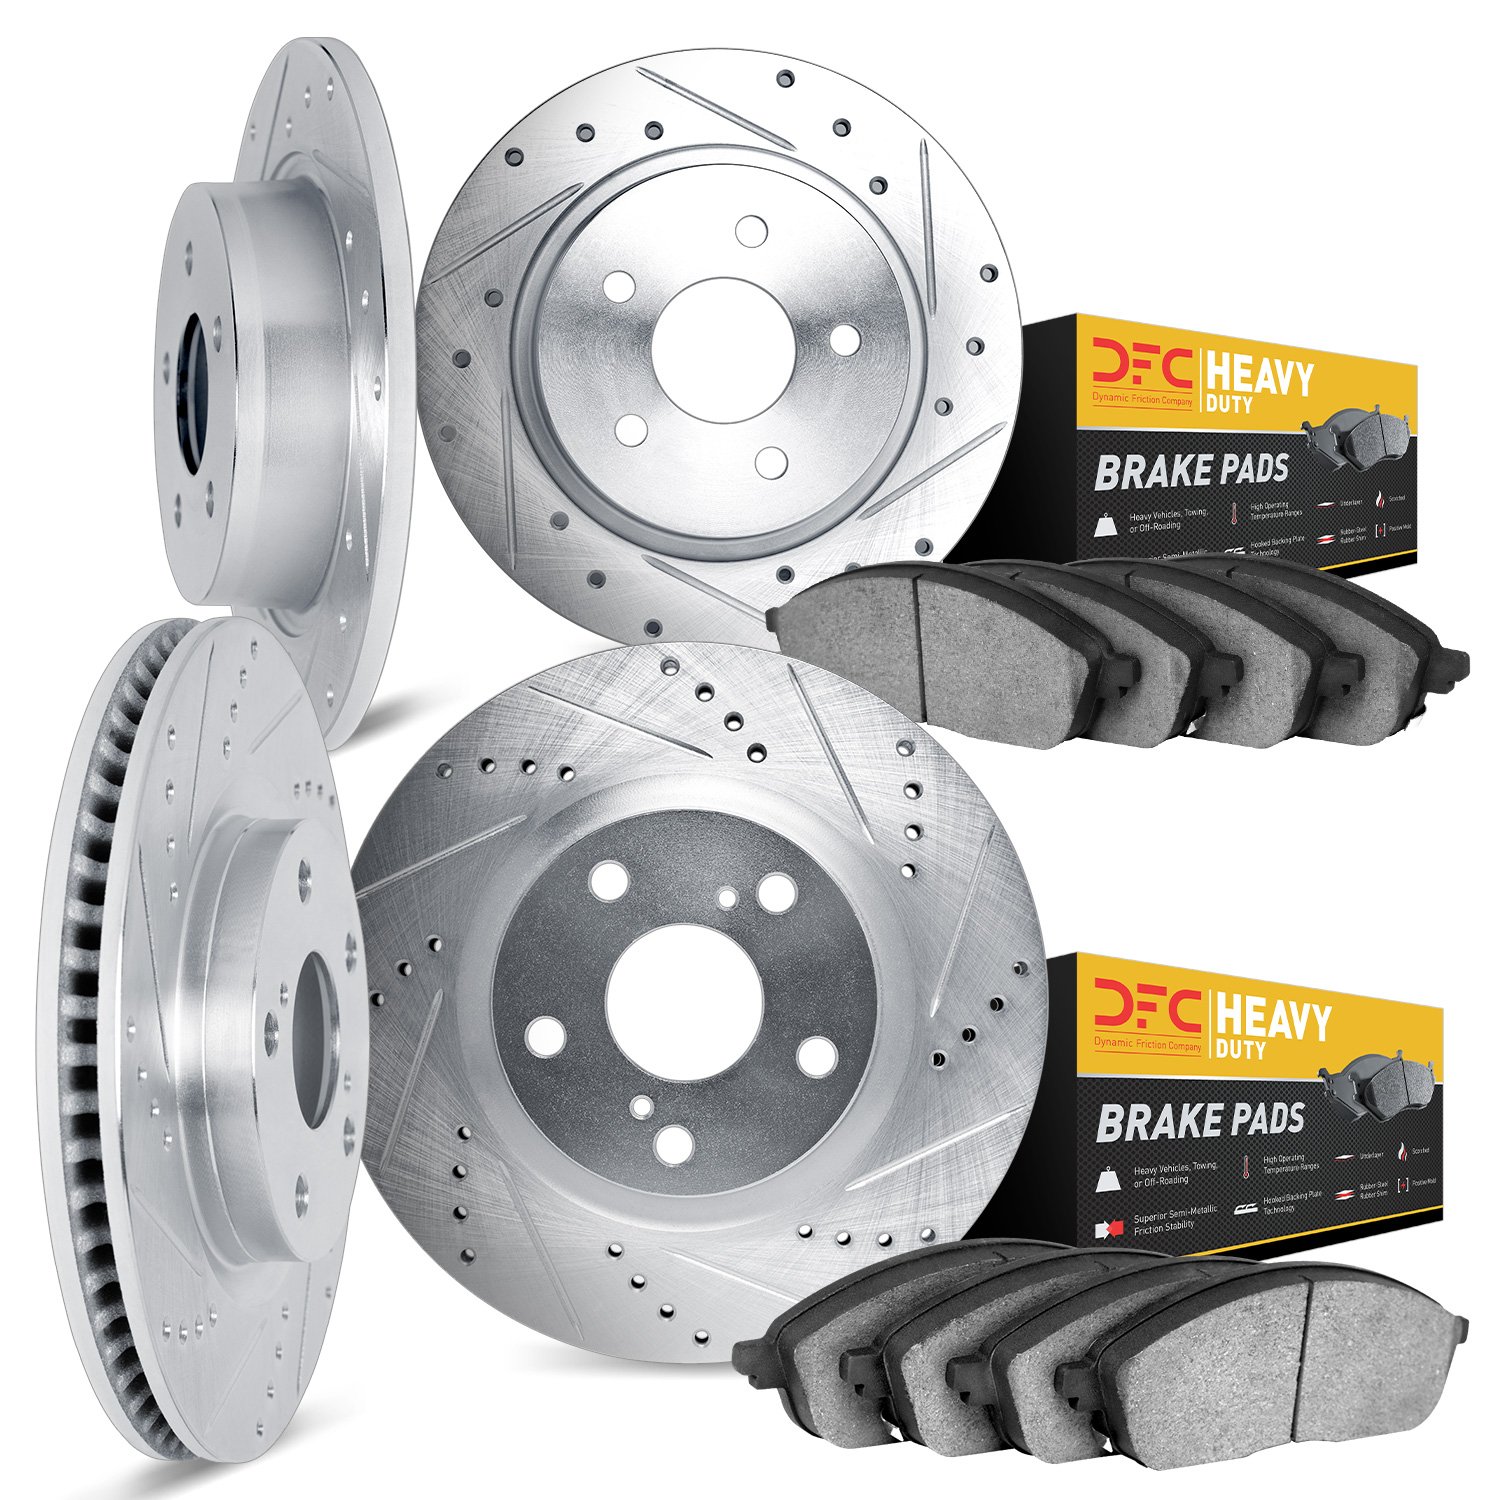 7204-42010 Drilled/Slotted Rotors w/Heavy-Duty Brake Pads Kit [Silver], Fits Select Mopar, Position: Front and Rear